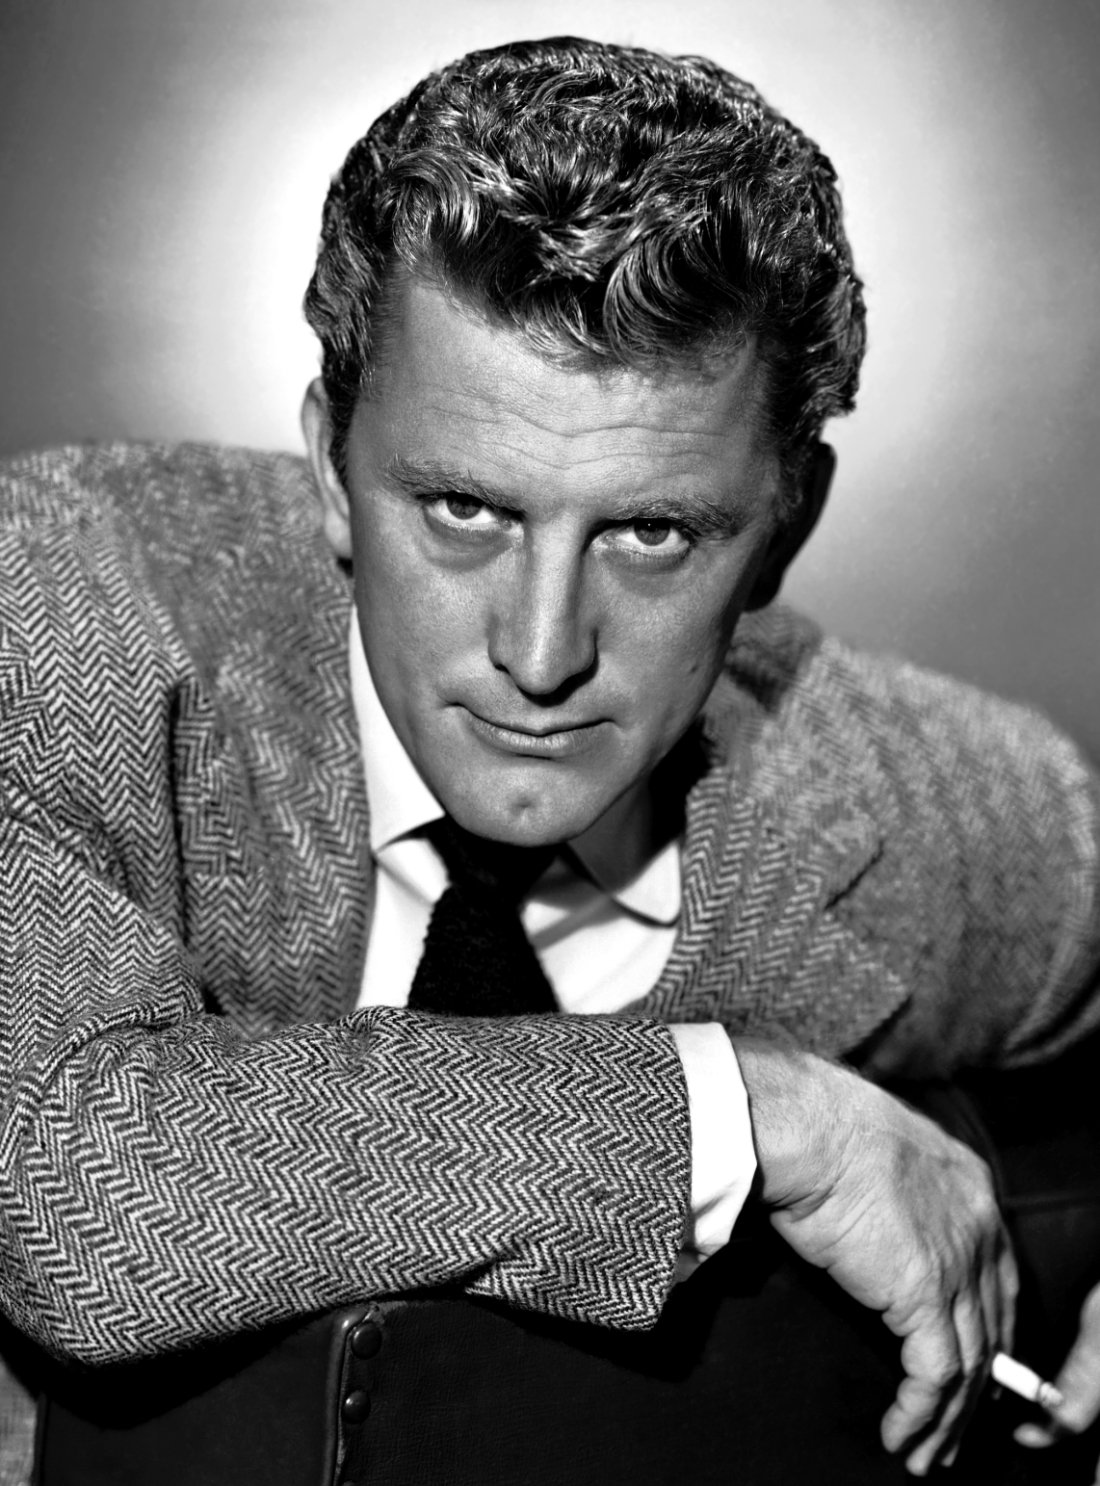 Publicity photo of Kirk Douglas nin the early '50s | Photo: Wikimedia Commons Images